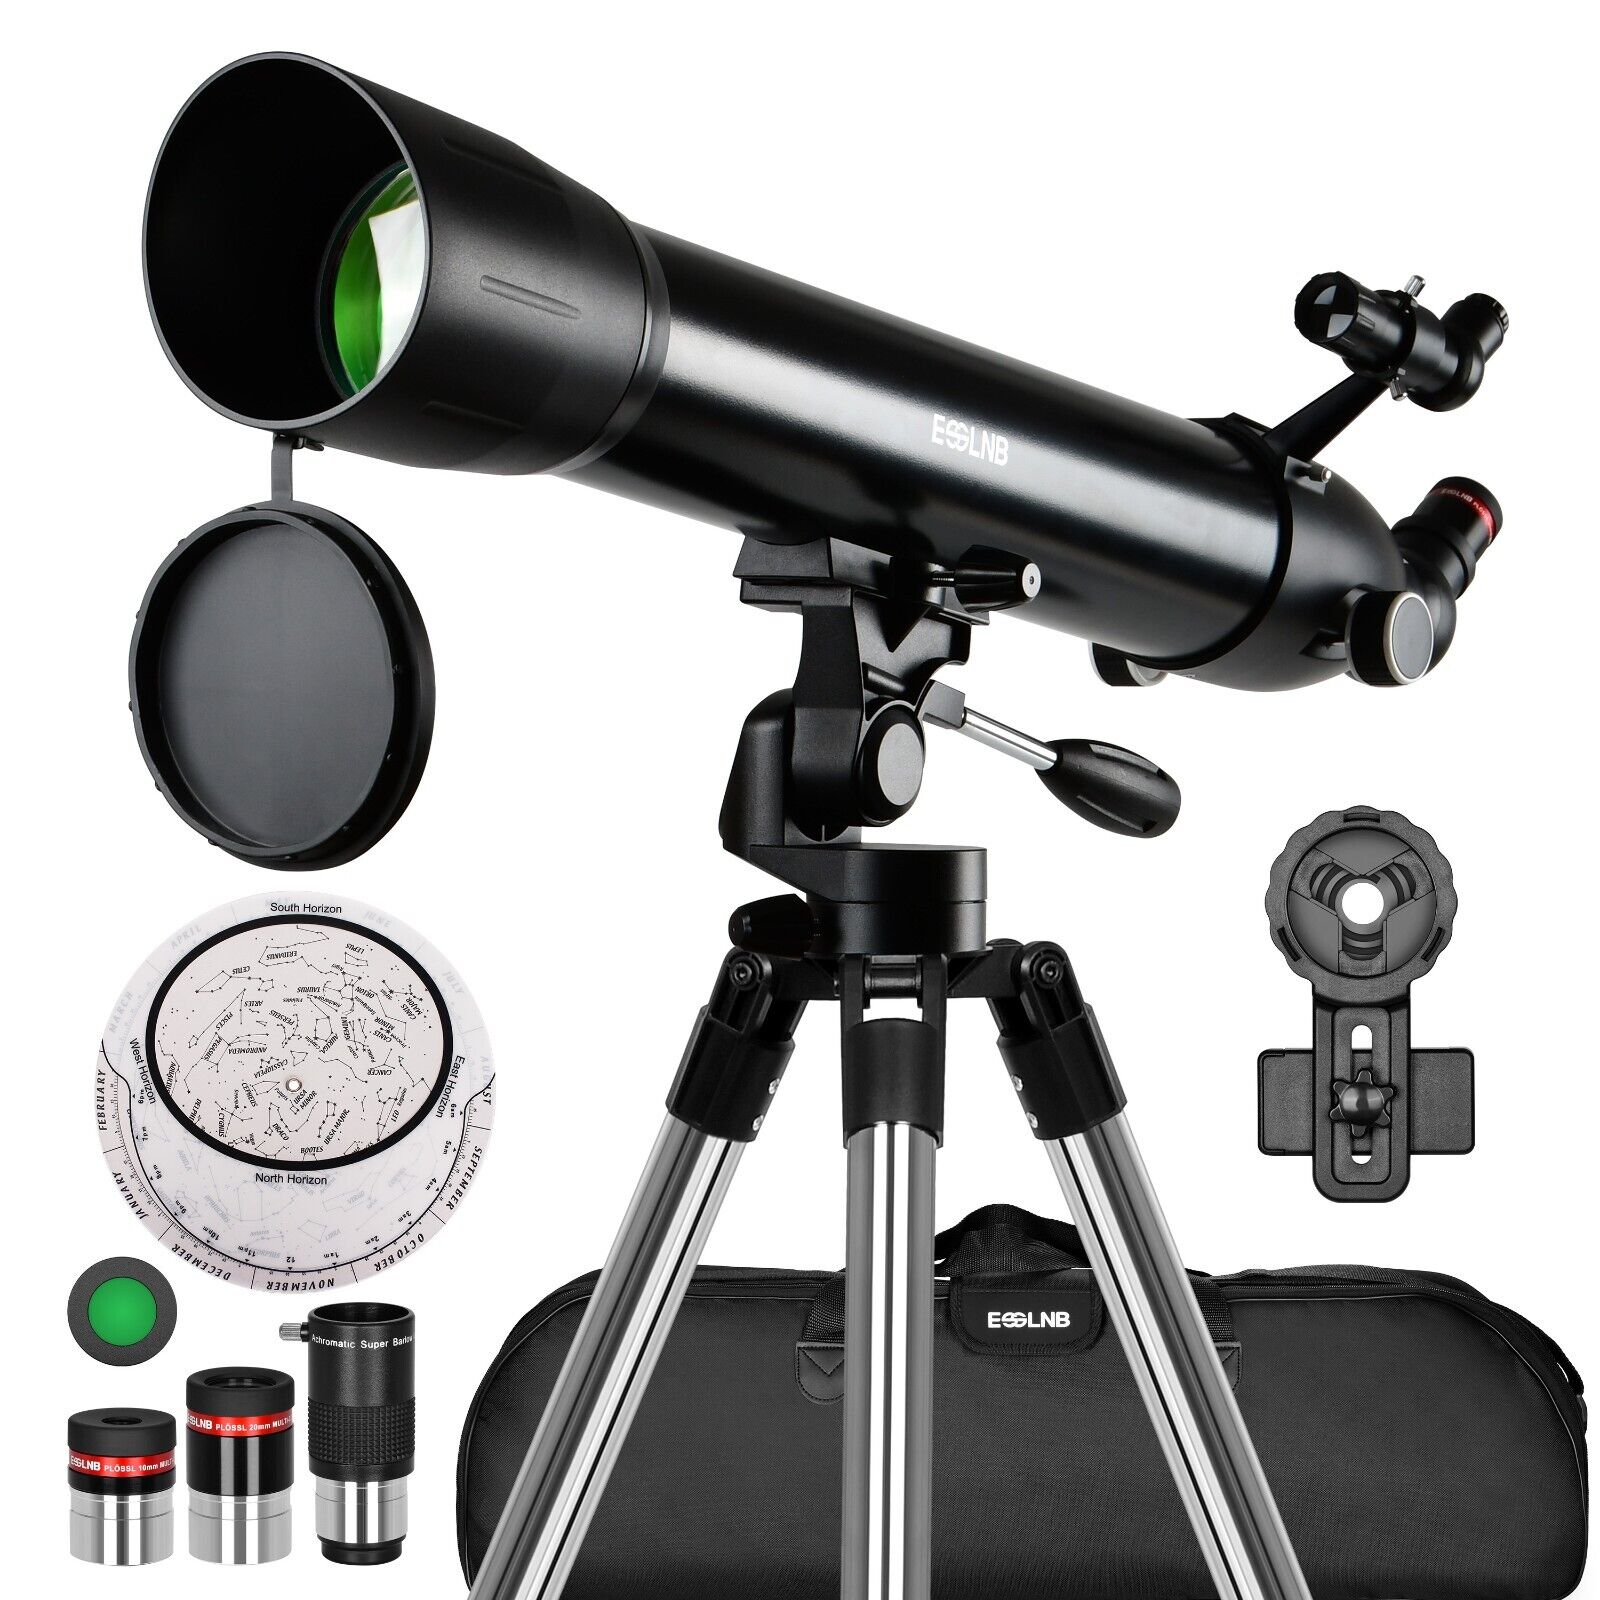 ESSLNB 700X90mm Astronomical Refractor Telescope with Phone Adapter Carry Bag